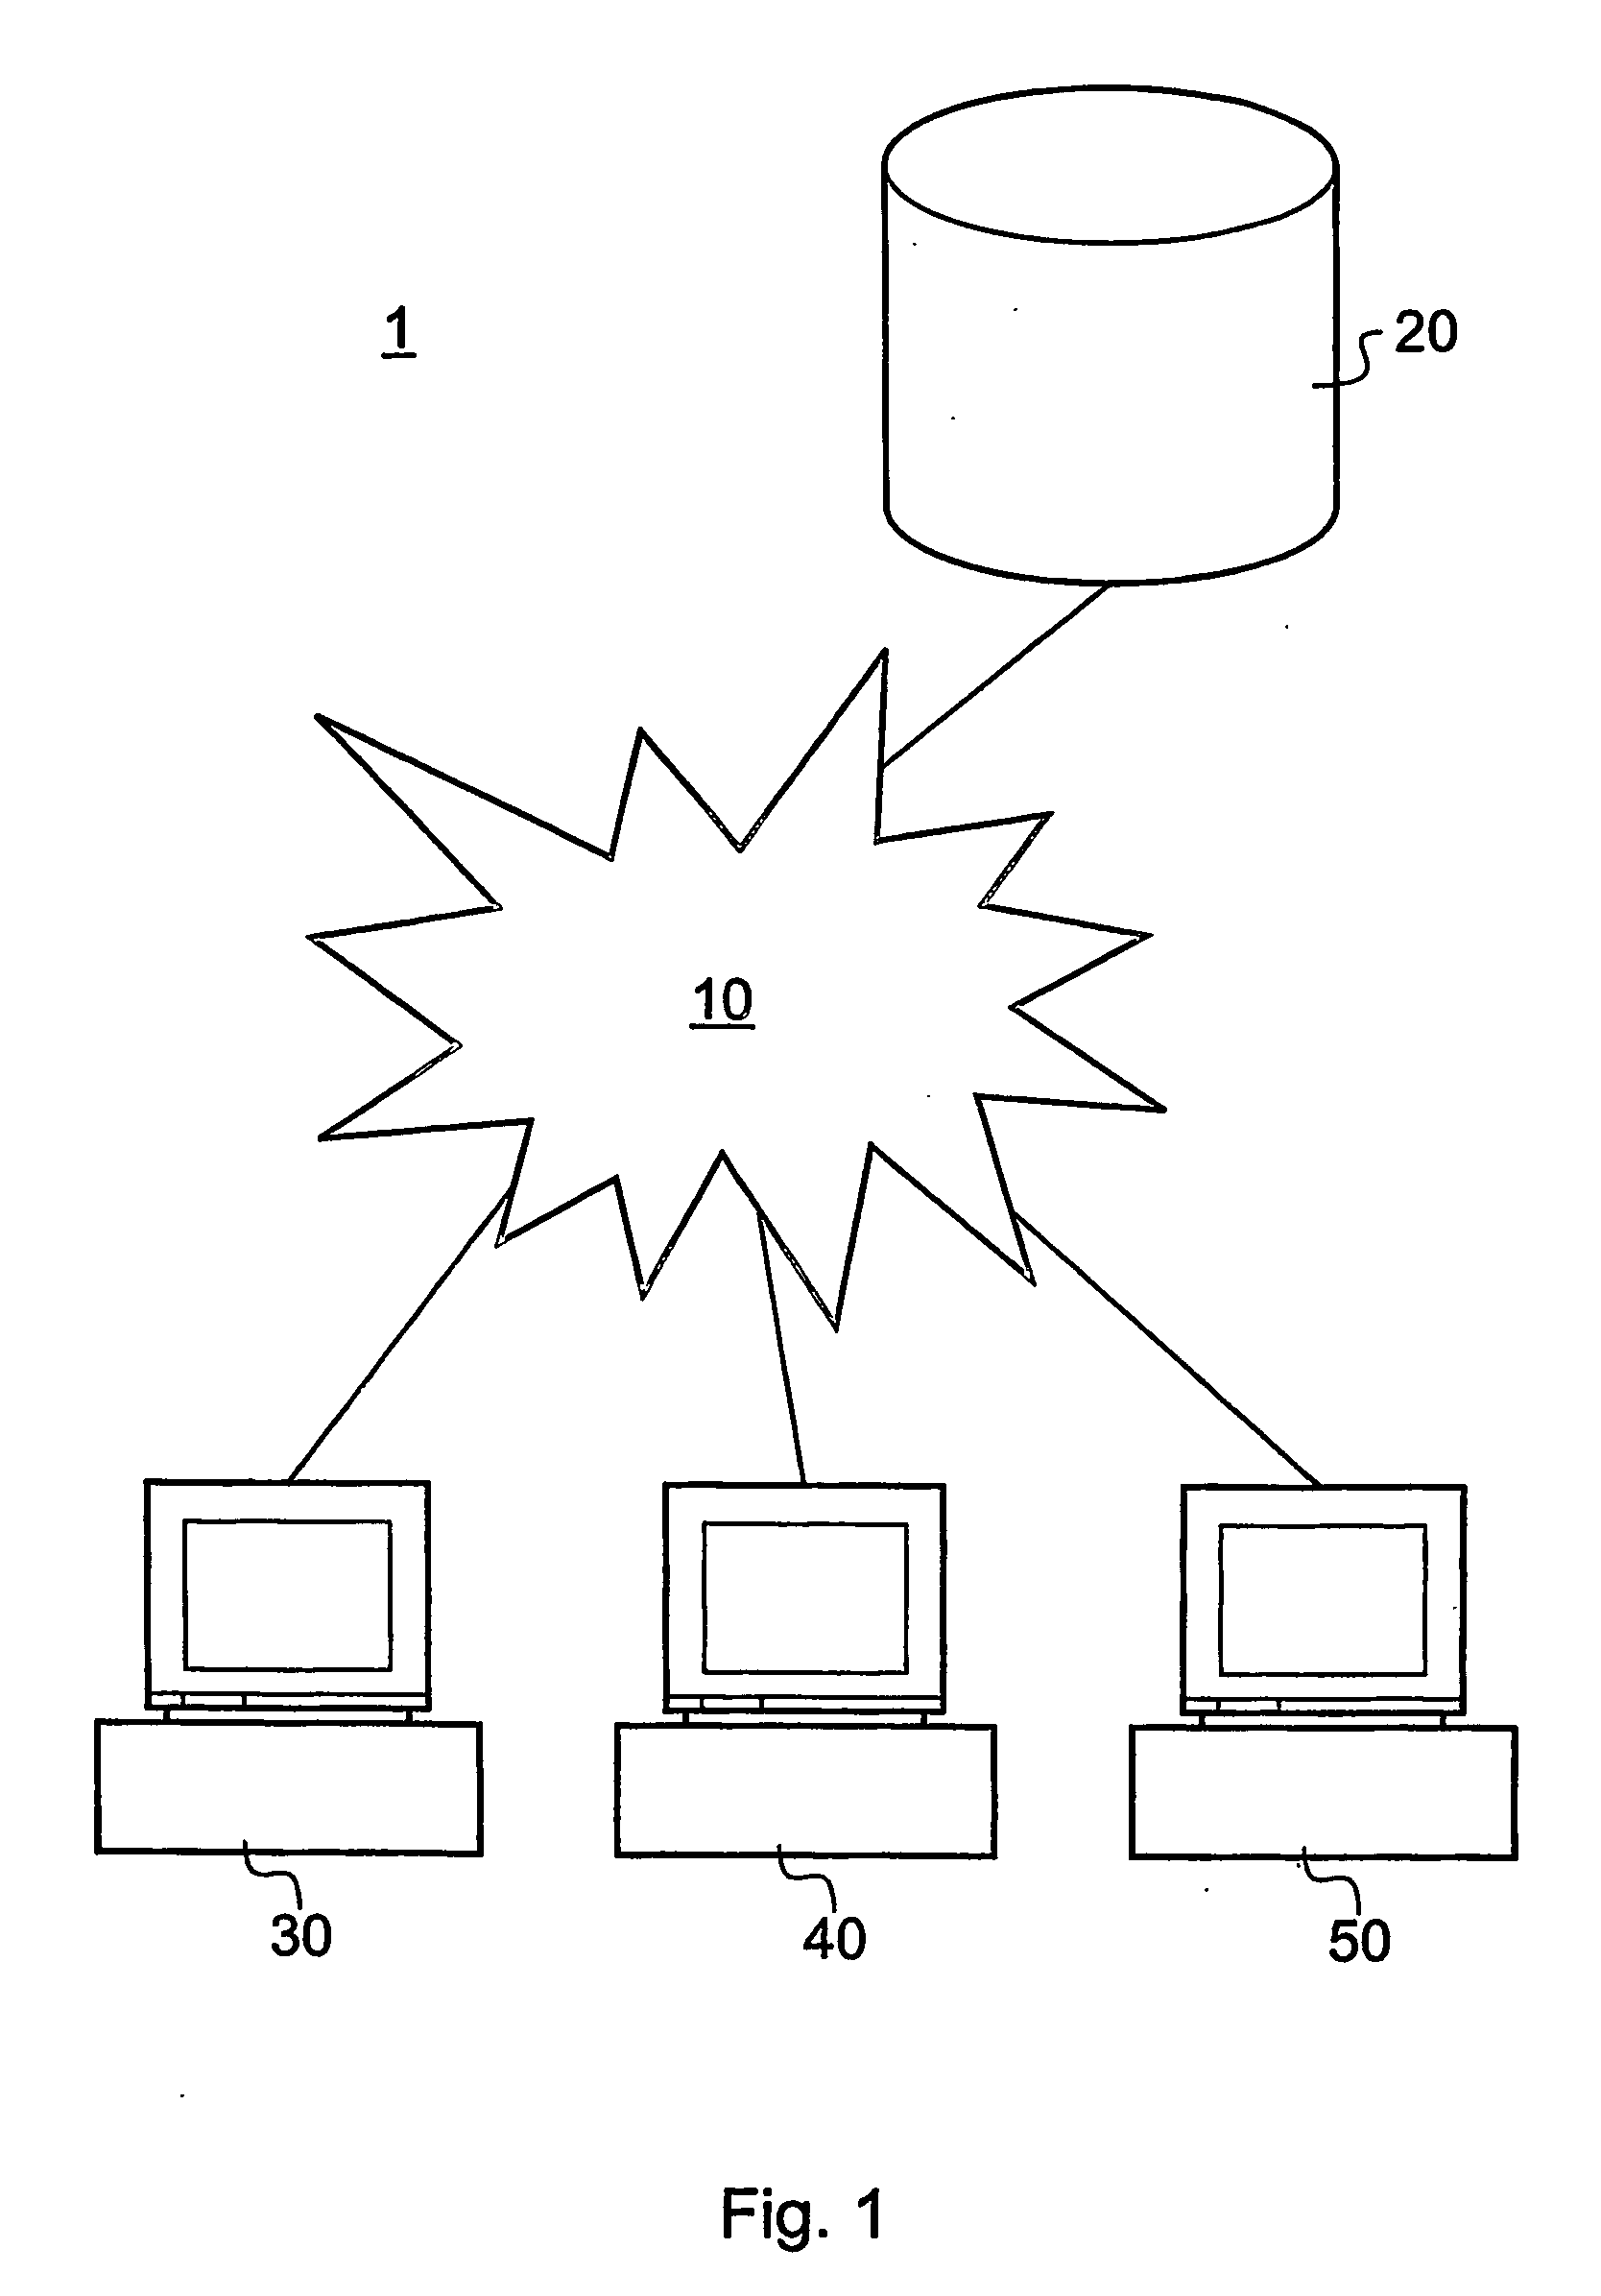 System and Method for Authenticating Documents